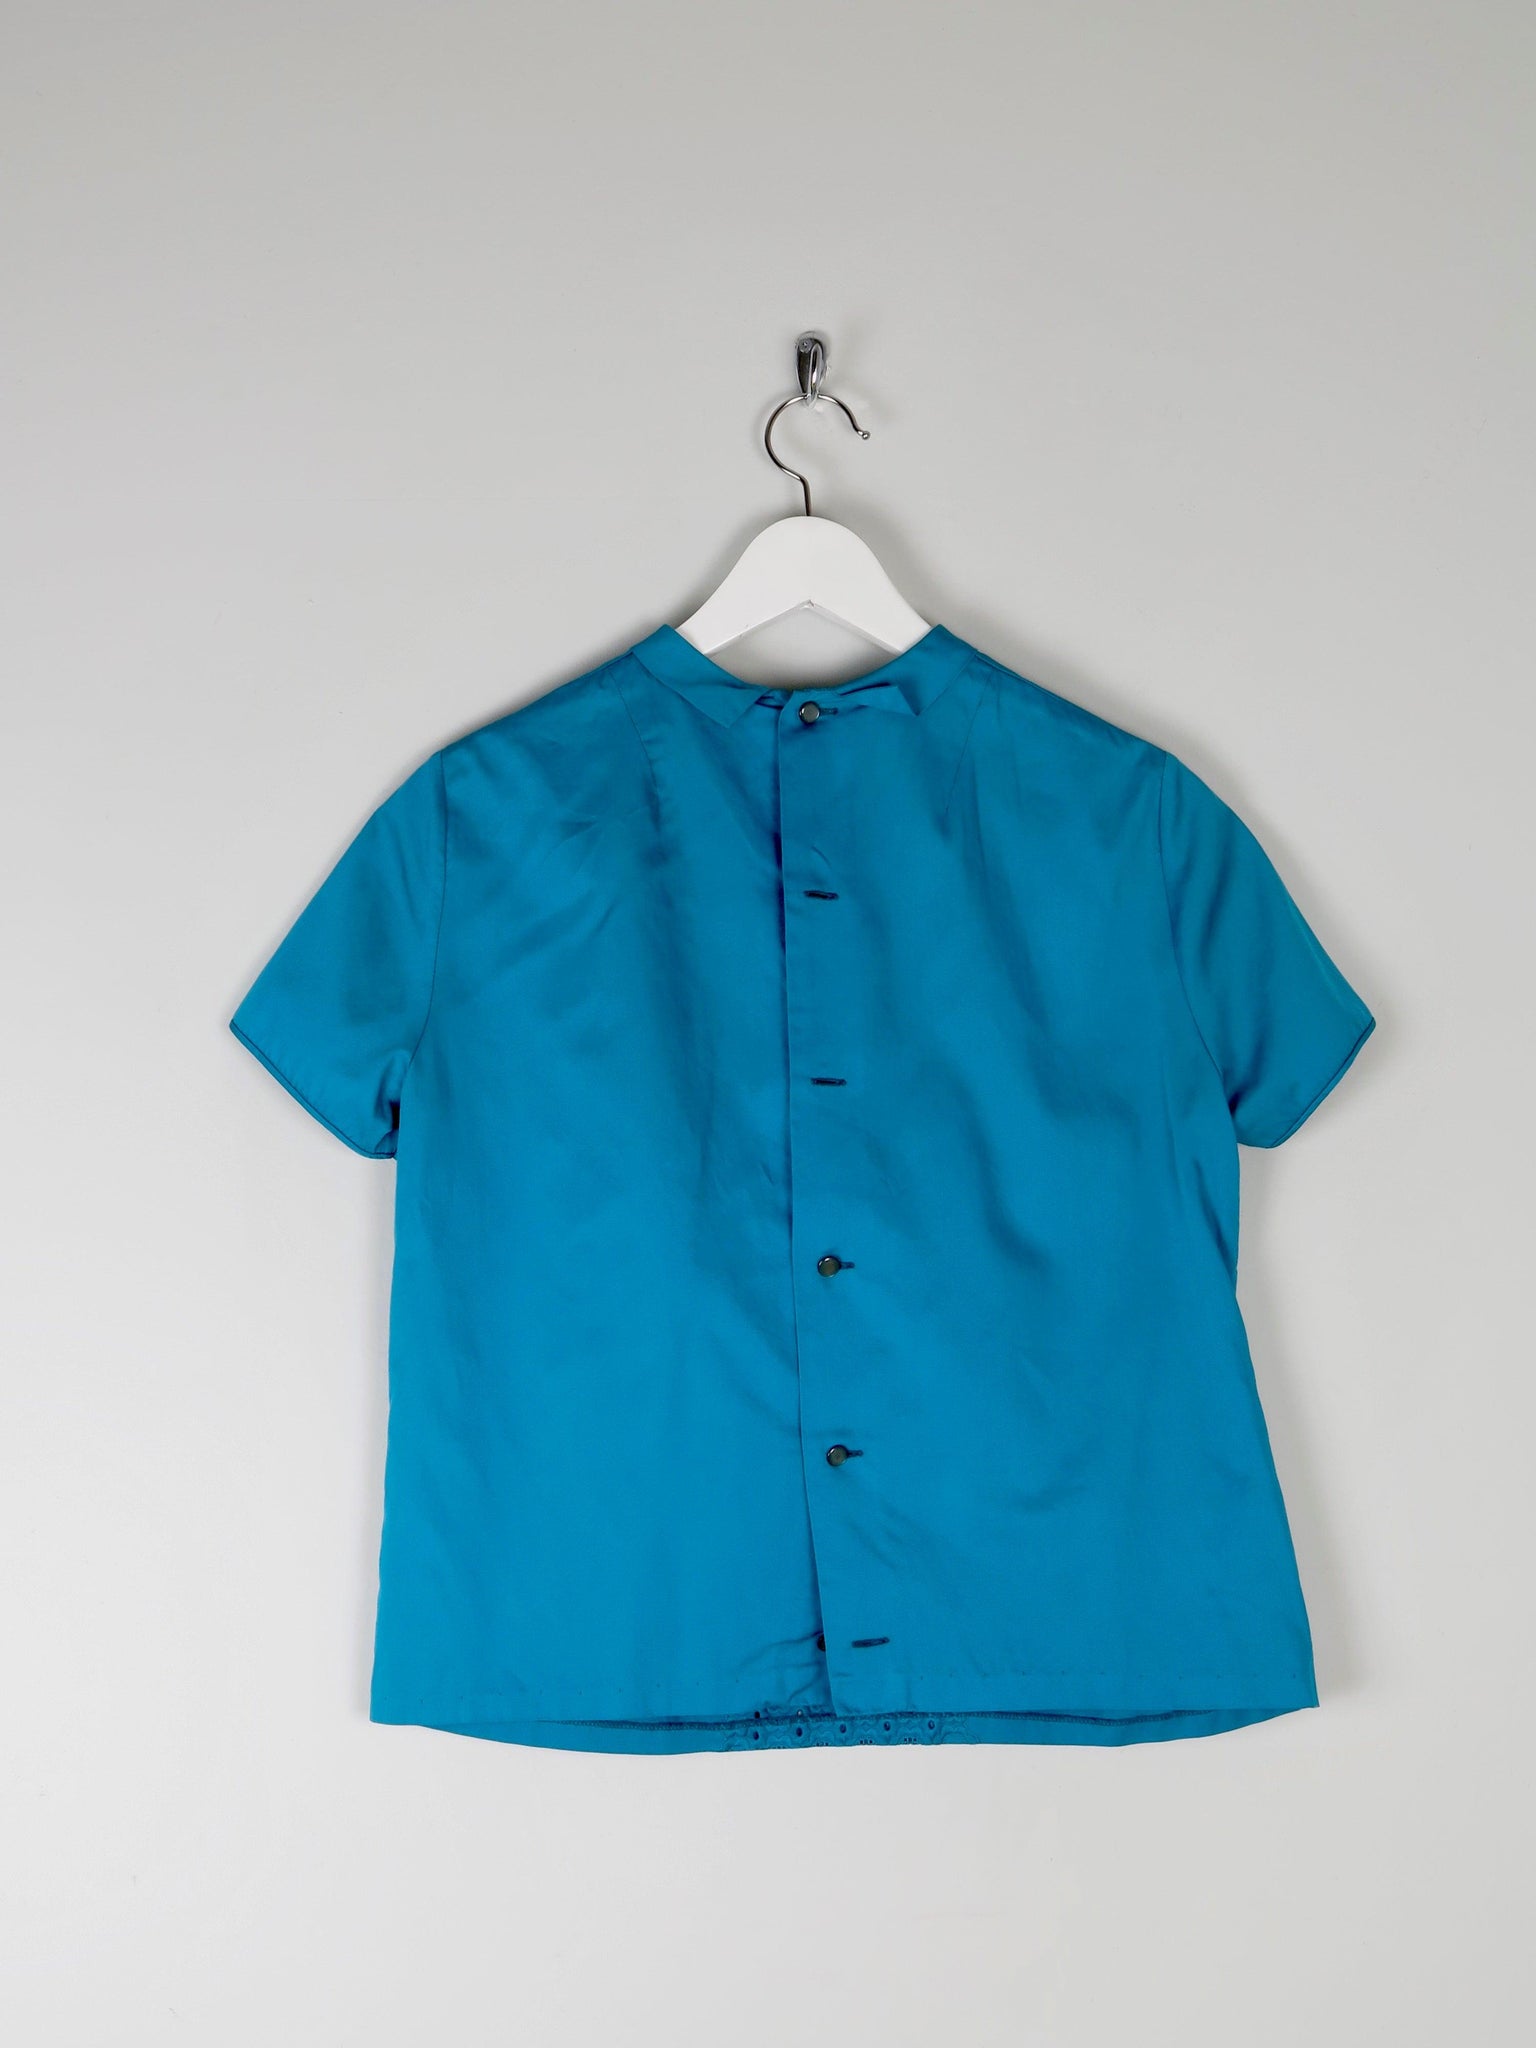 Petrol Blue 1950s Blouse S/M - The Harlequin